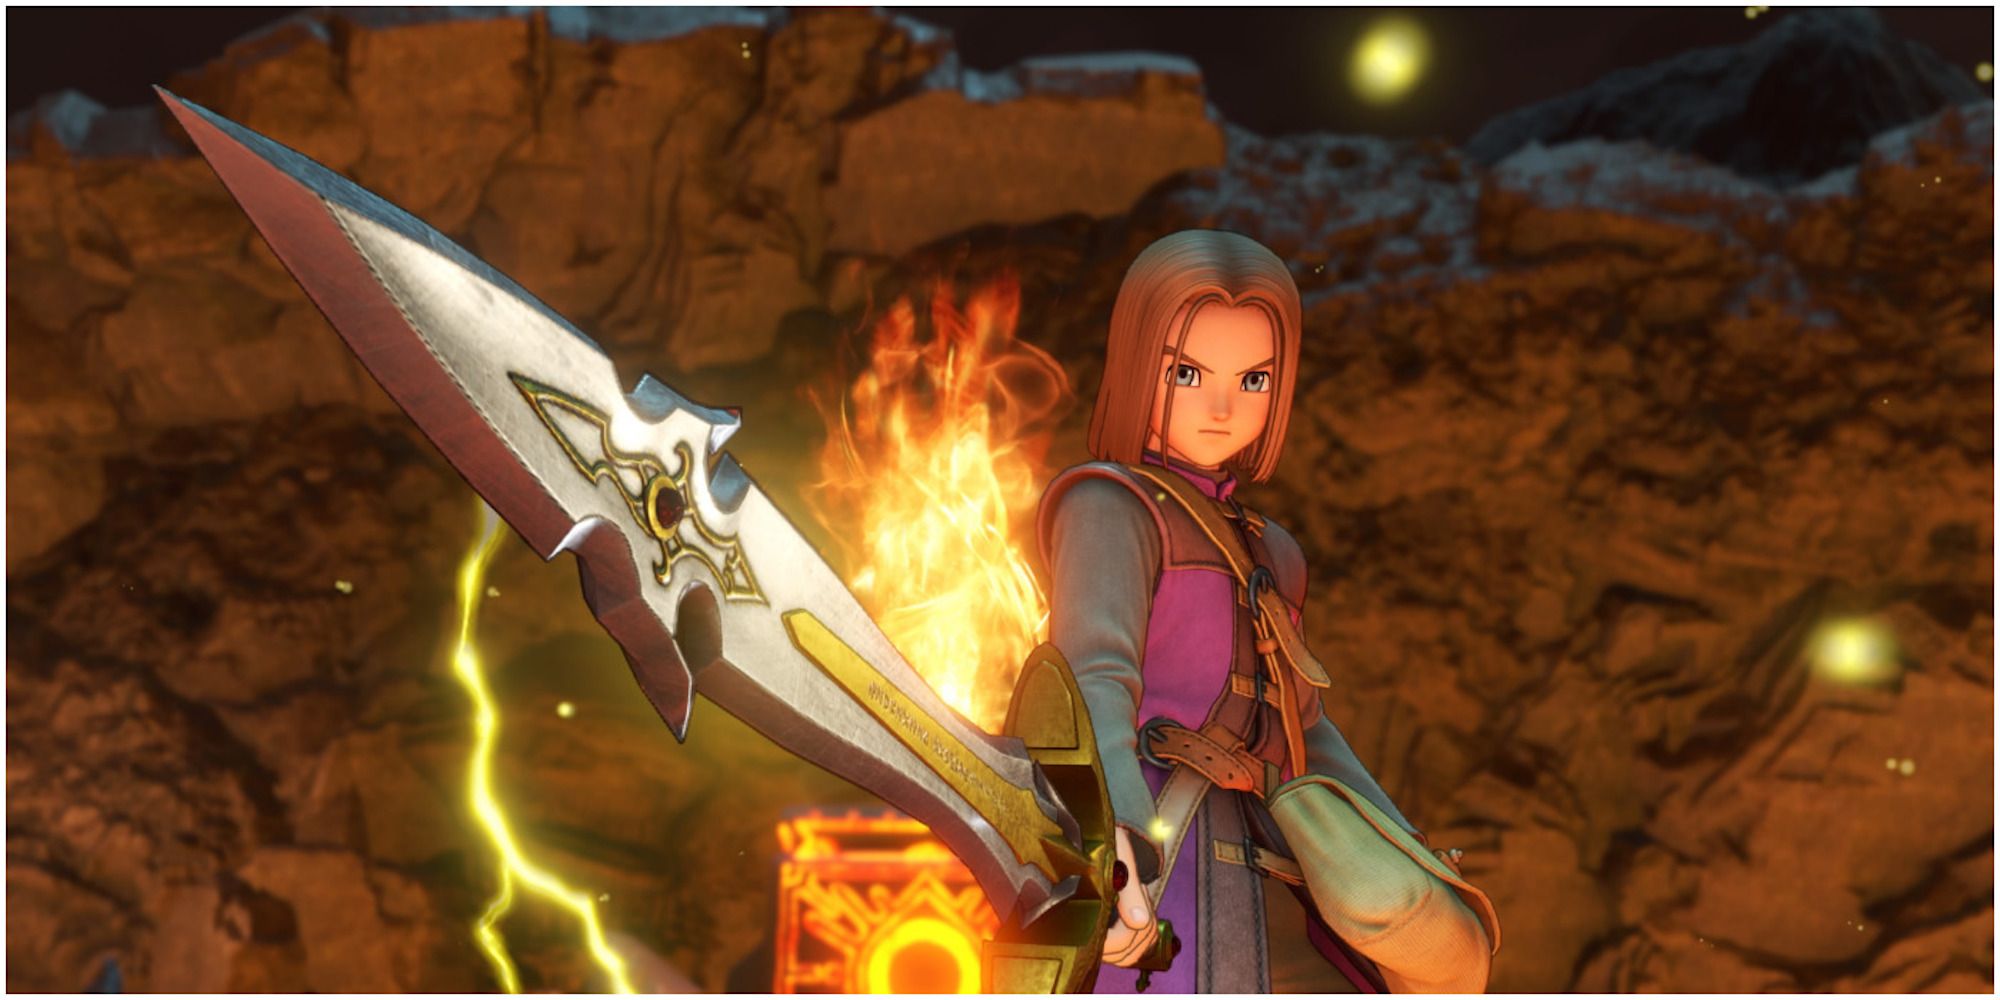 The Luminary from Dragon Quest XI holding his sword